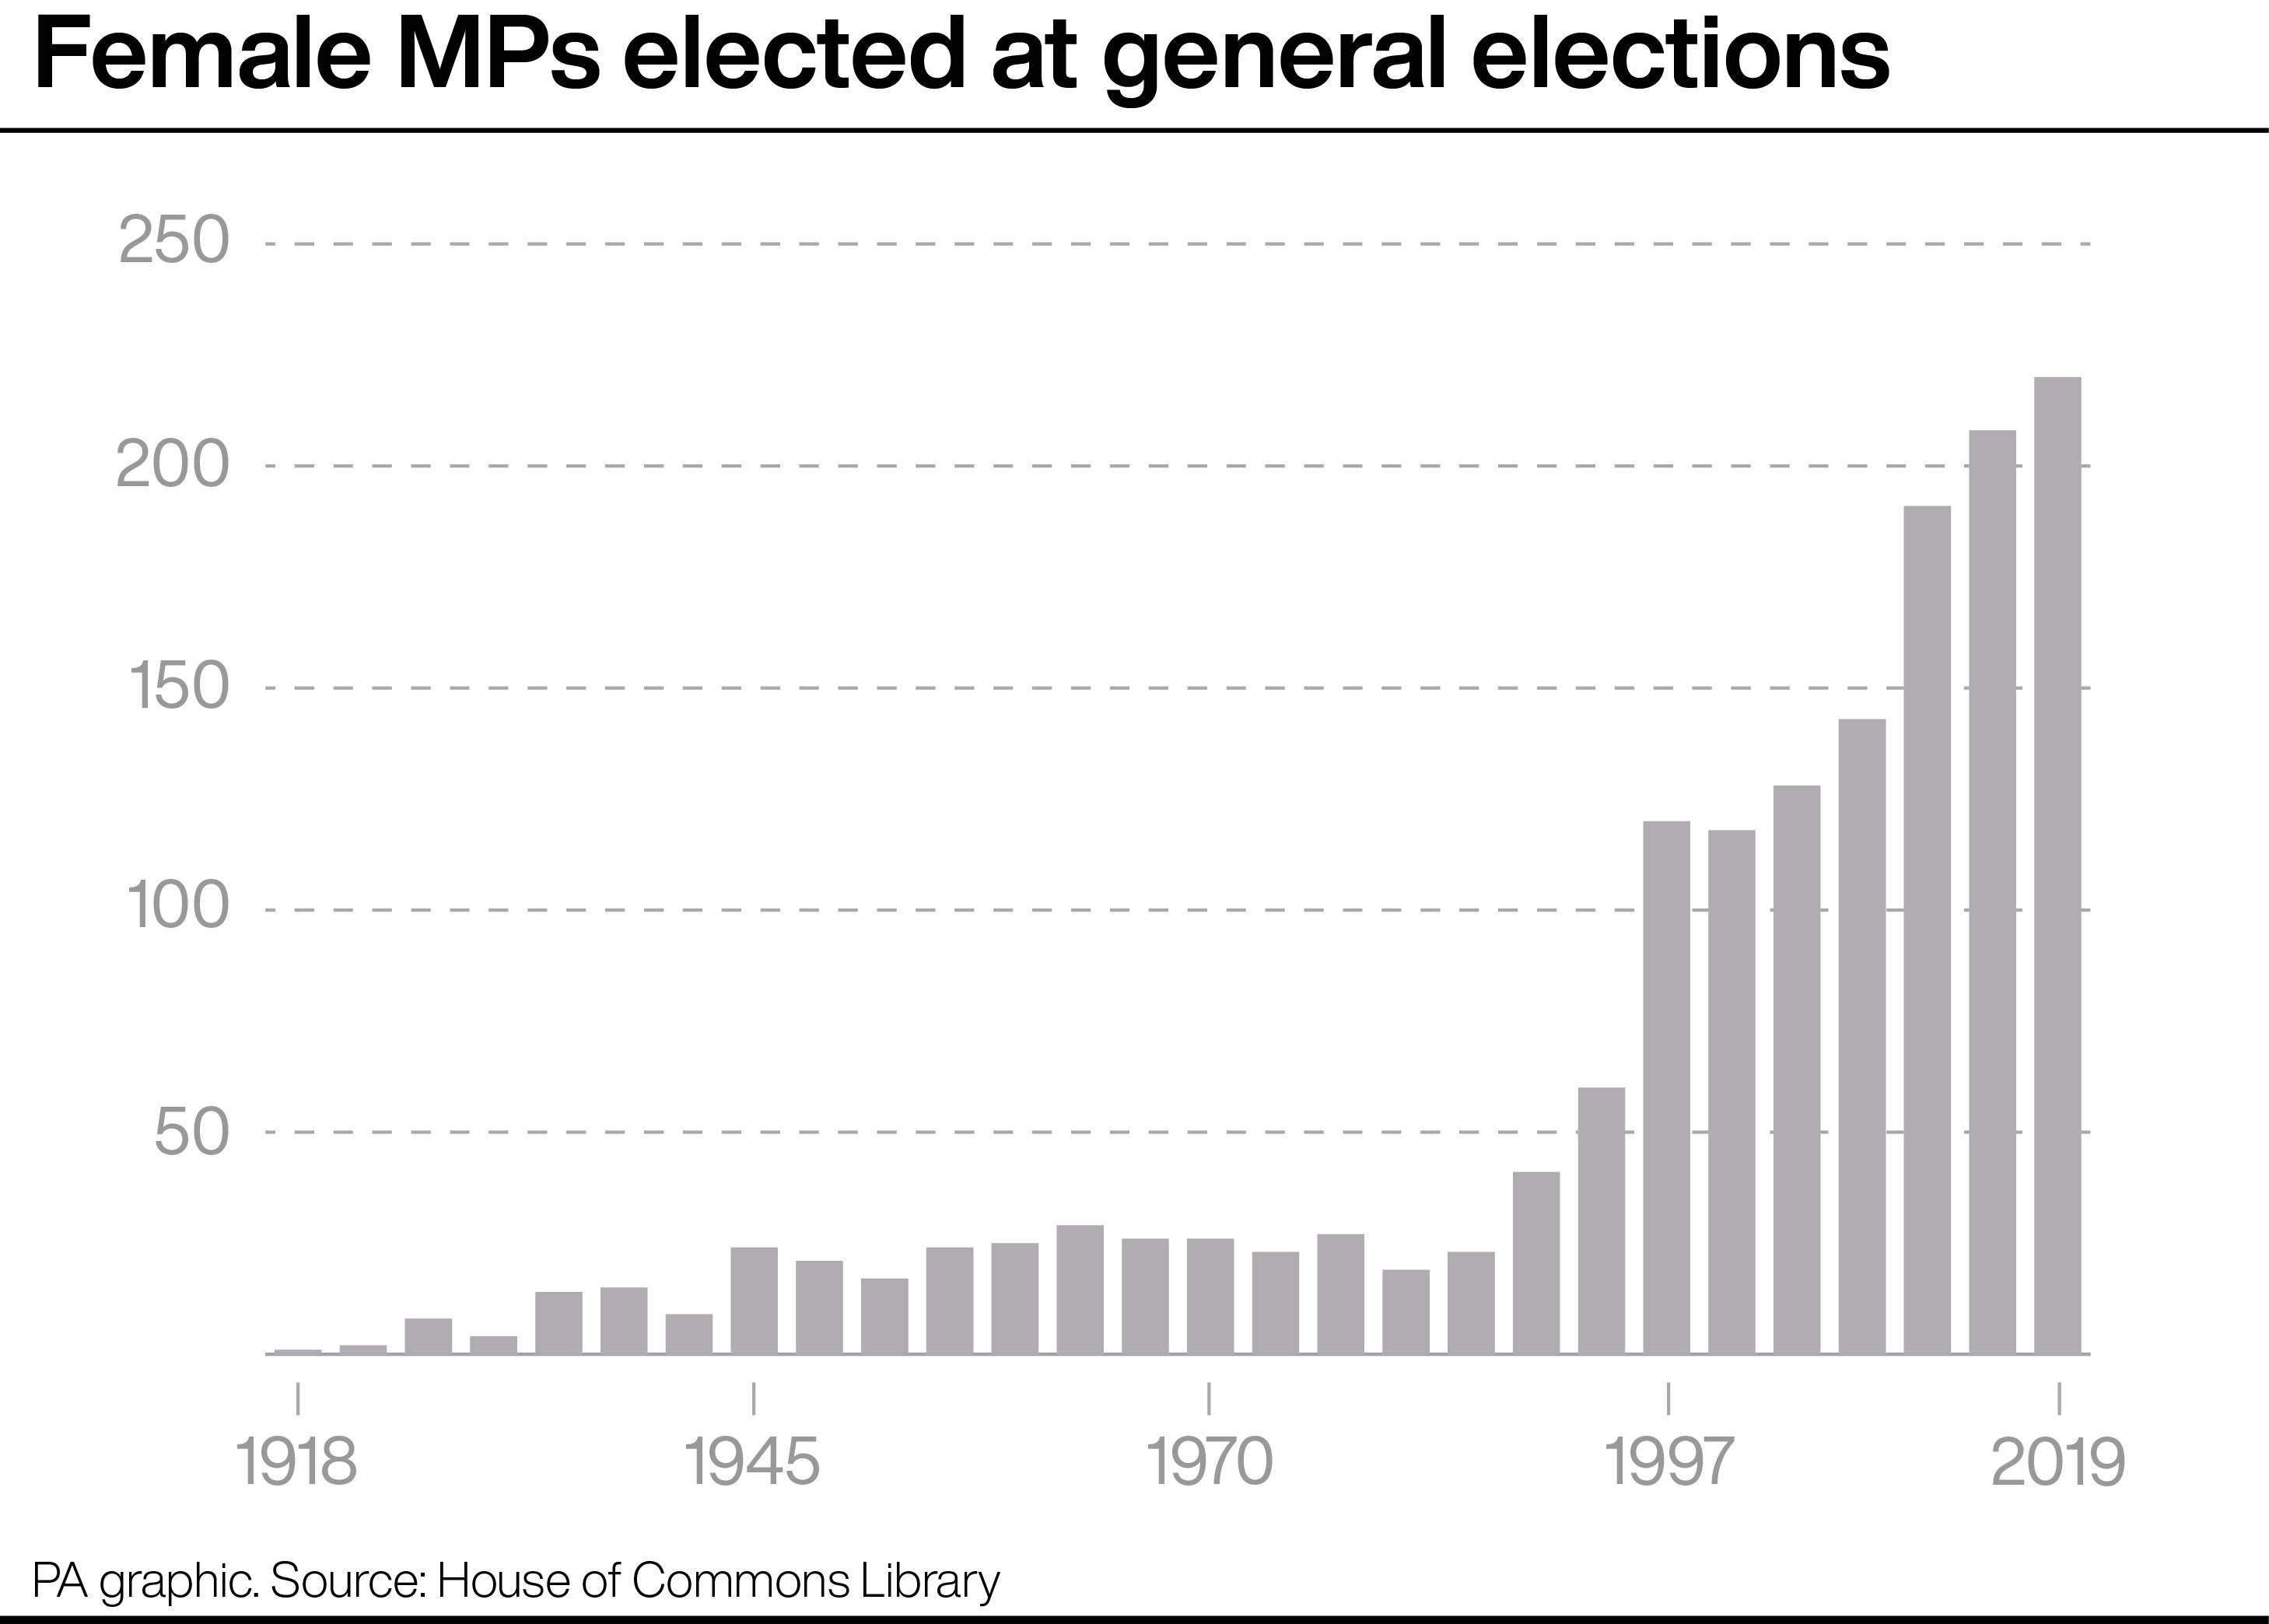 A chart showing female MPs elected at general elections